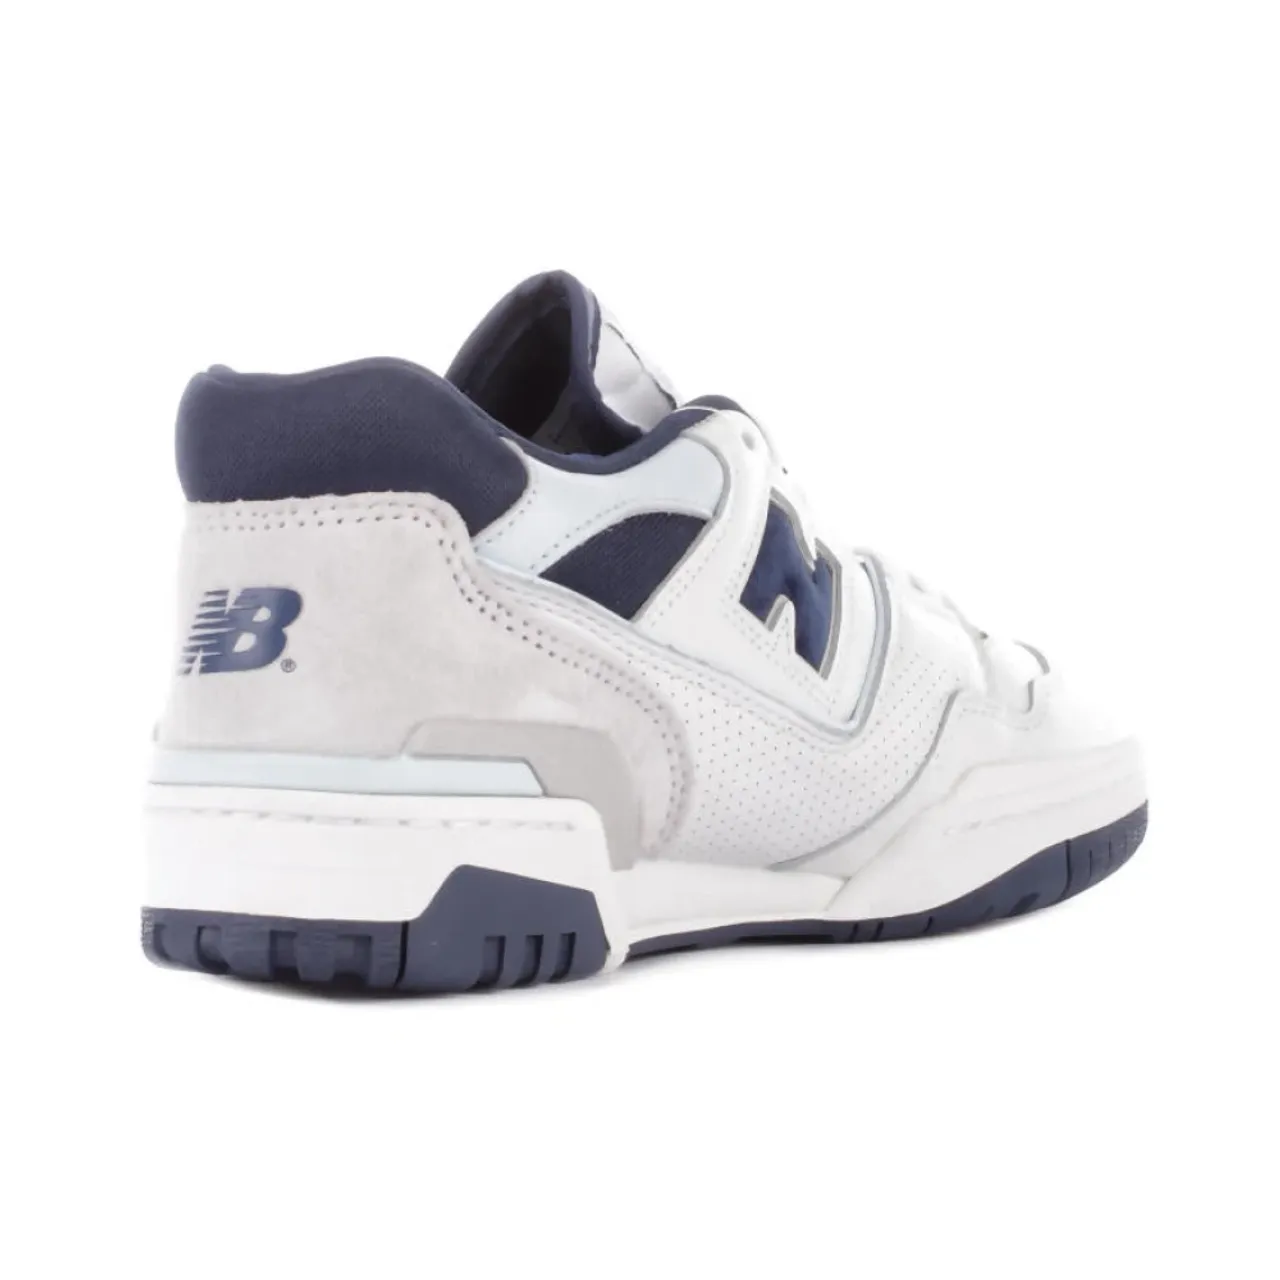 New Balance , White Leather Sneakers ,Multicolor male, Sizes: 9 UK, 7 1/2 UK, 3 UK, 10 1/2 UK, 6 1/2 UK, 4 1/2 UK, 8 UK, 4 UK, 8 1/2 UK, 5 1/2 UK, 6 U